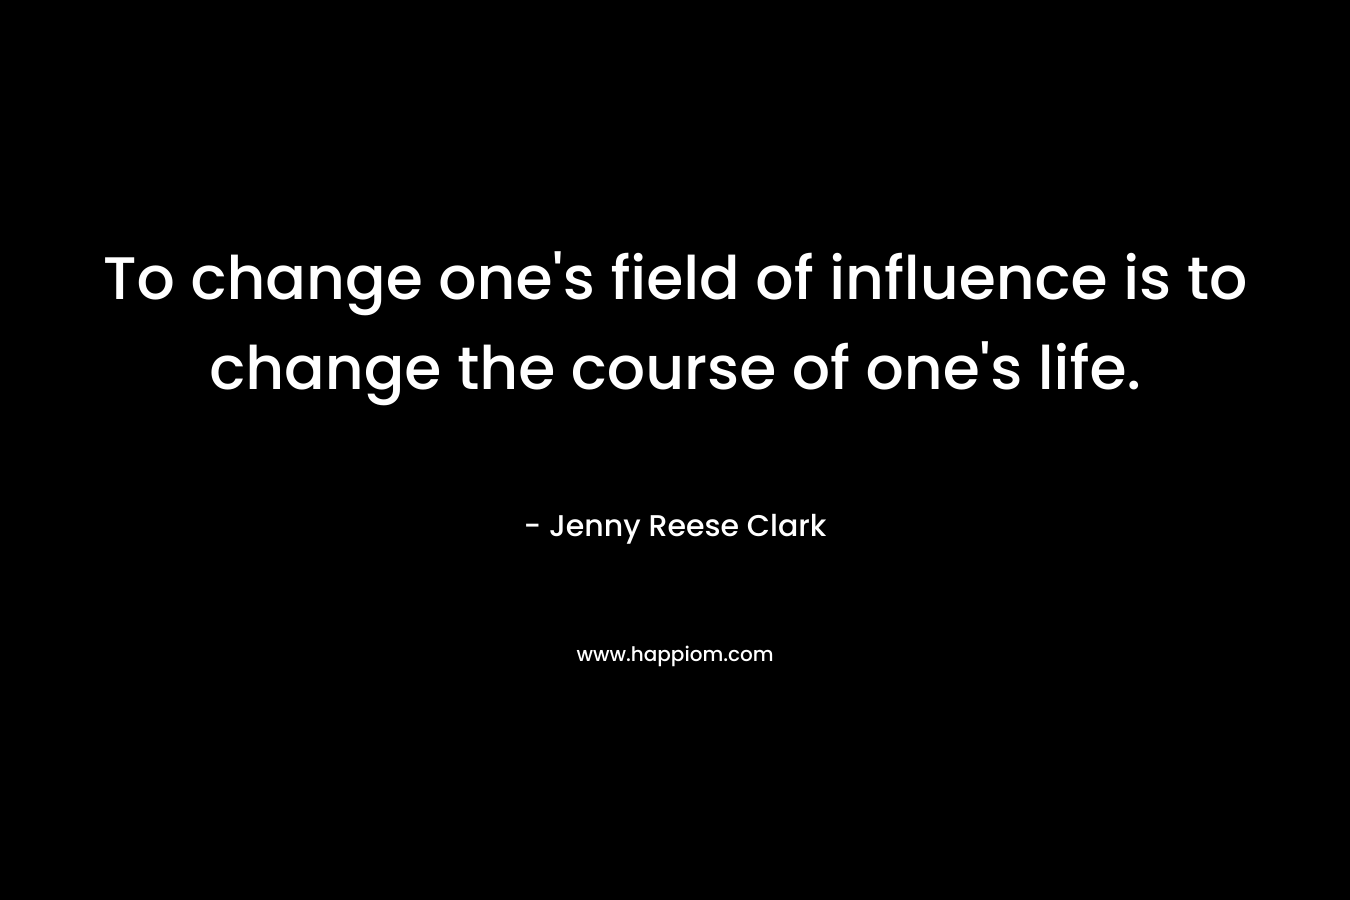 To change one's field of influence is to change the course of one's life.